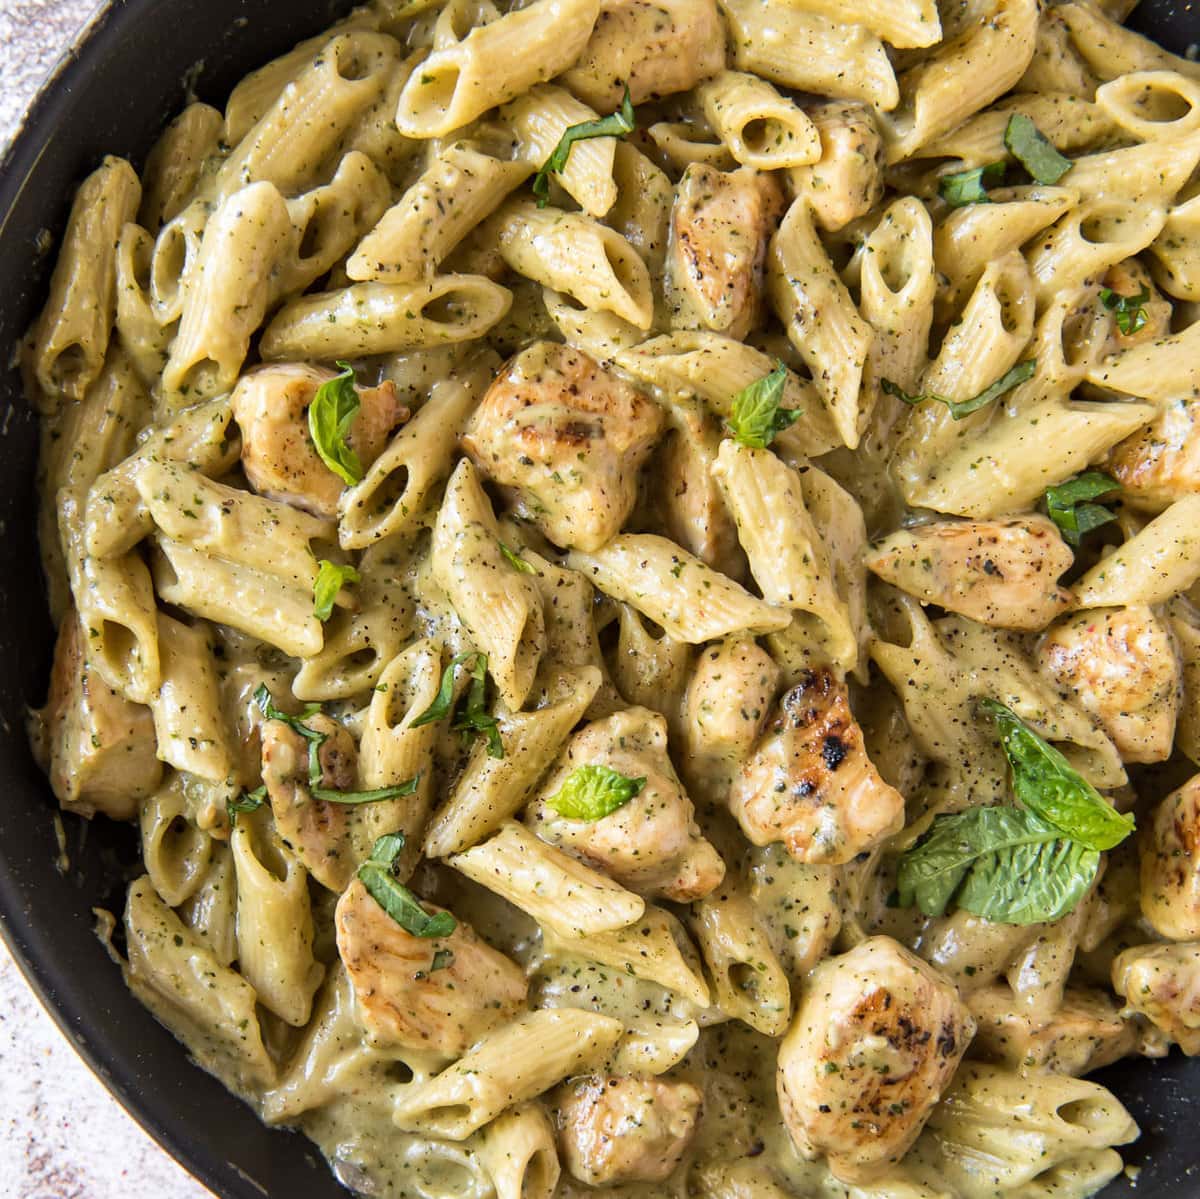 A pan filled with Chicken and Pasta, topped with a creamy pesto sauce.